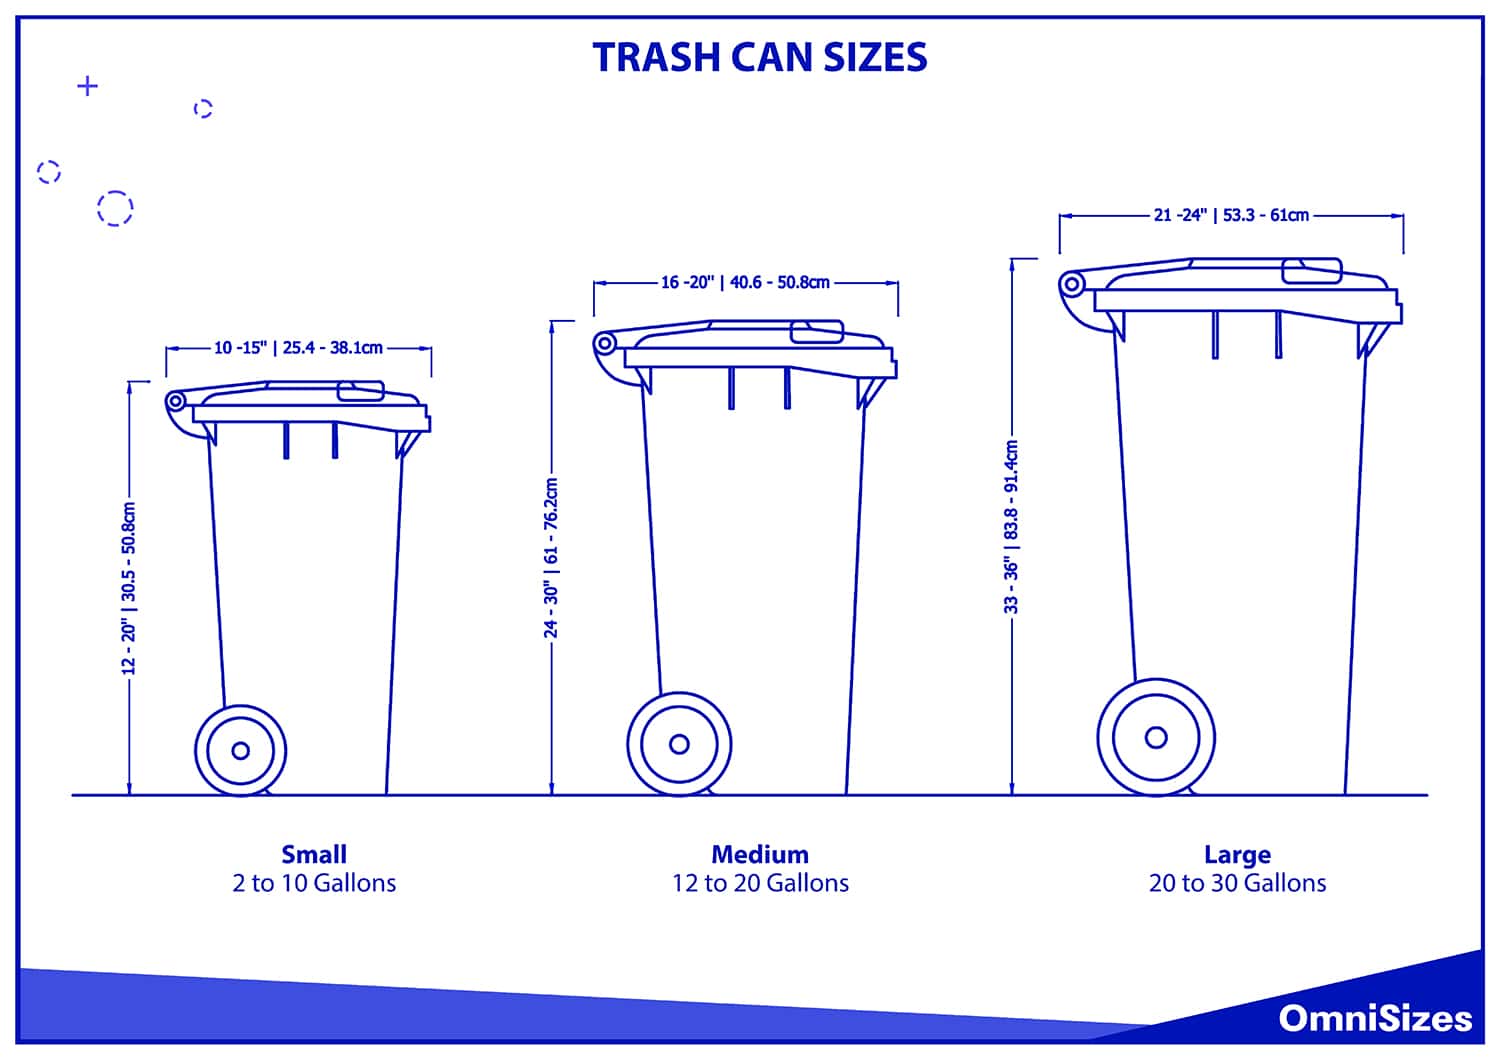 Trash can sizes